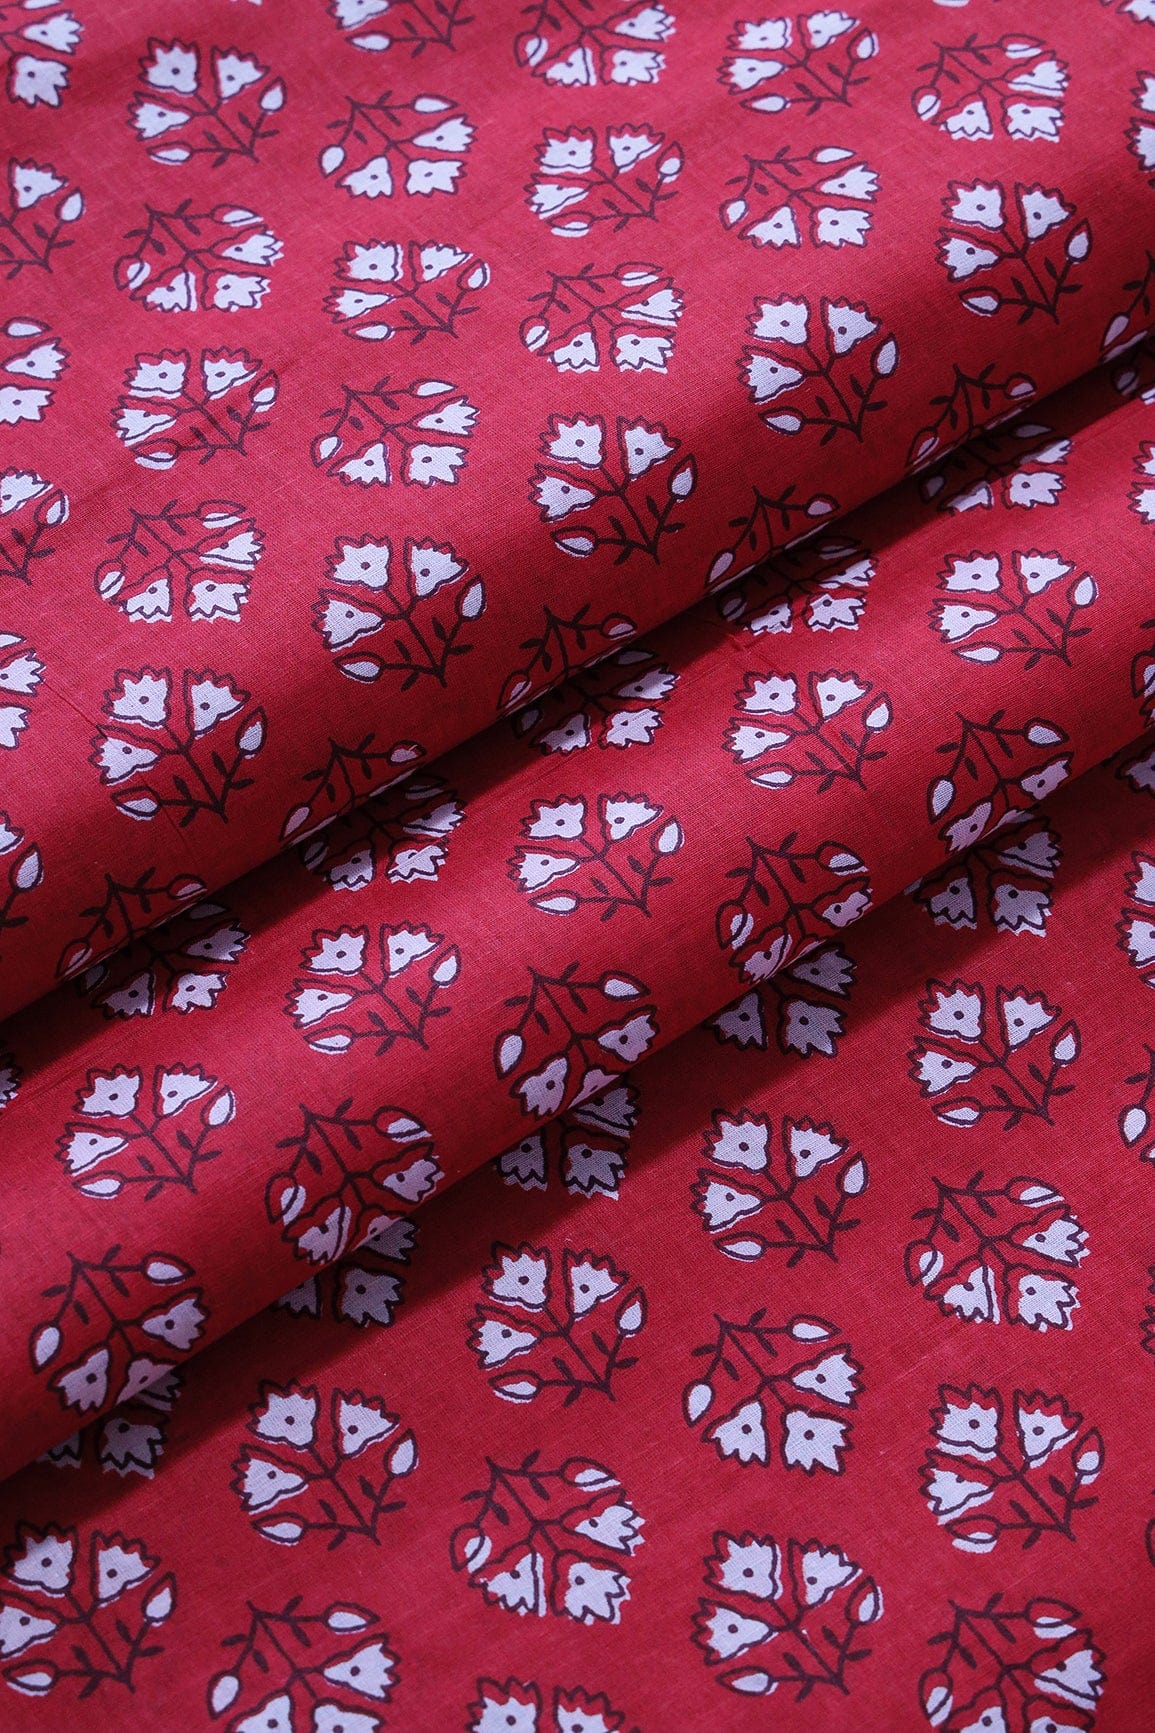 doeraa Prints White Floral Booti Pattern Print On Red Pure Cotton Fabric